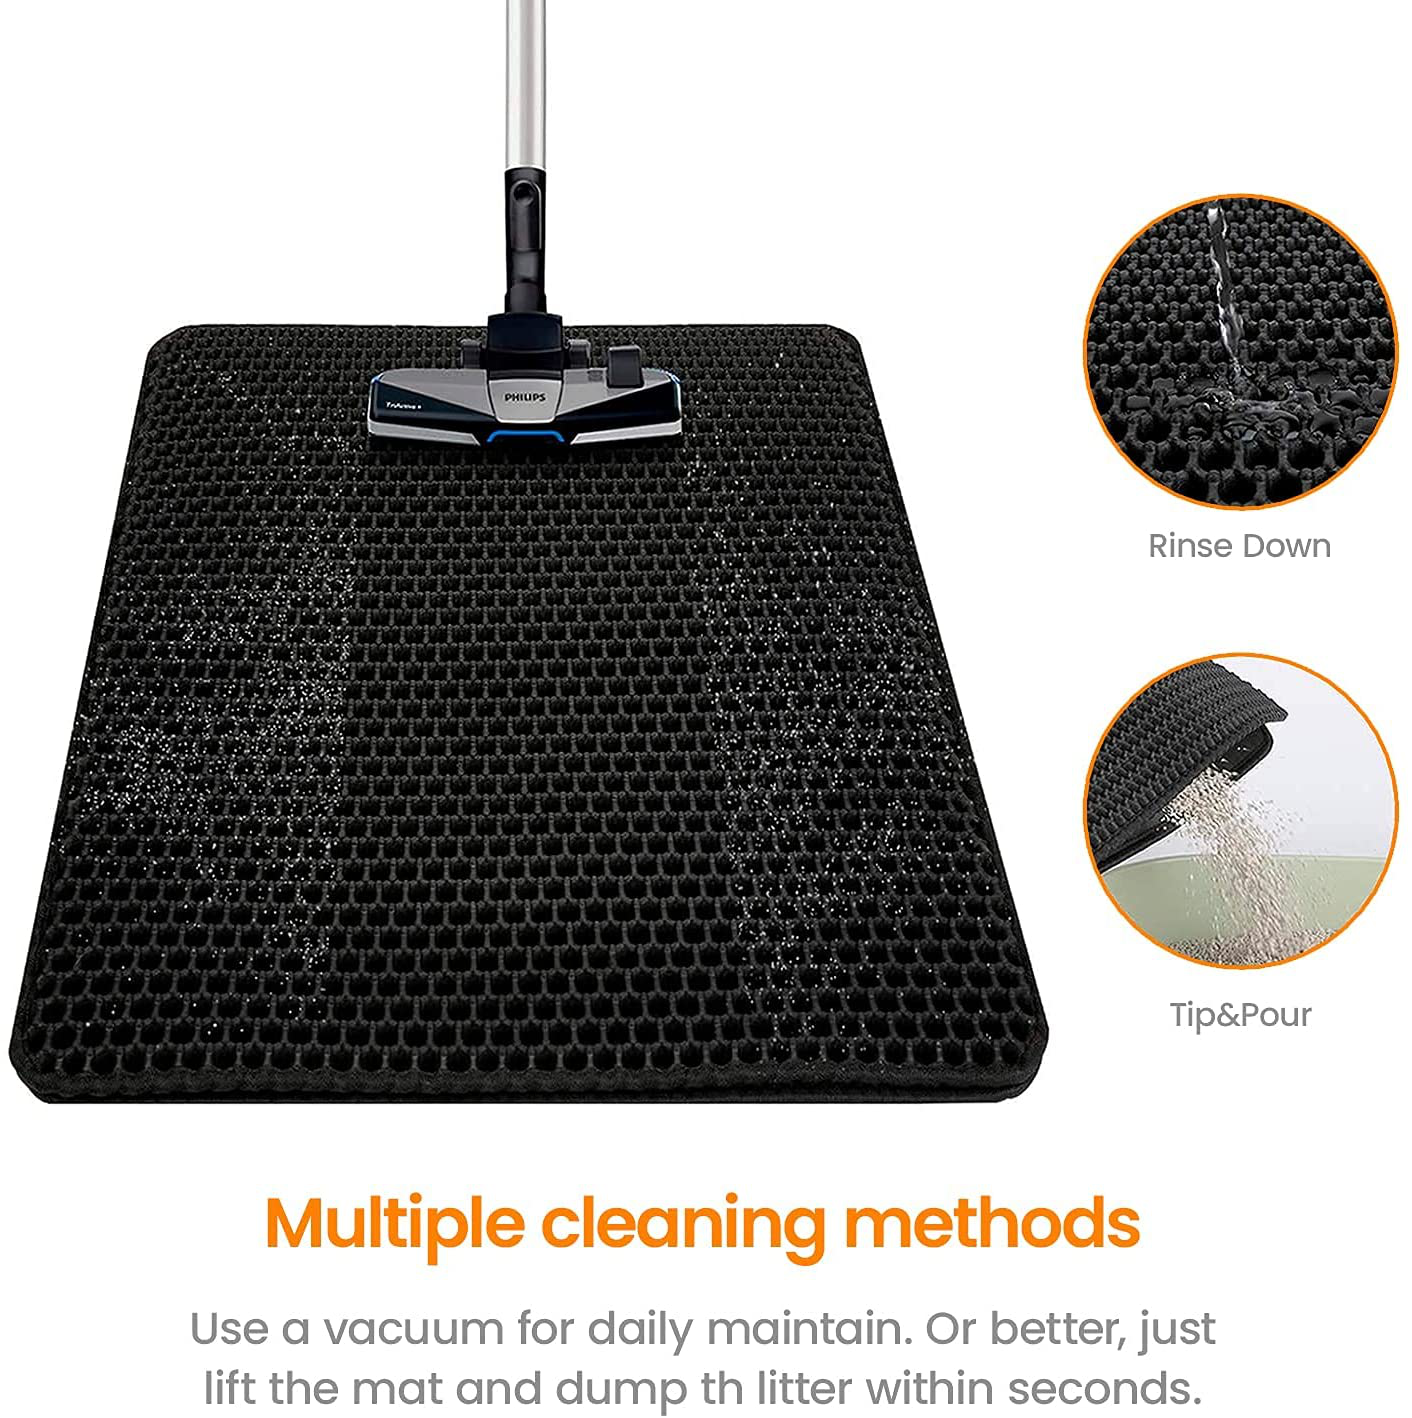 Conlun Cat Litter Mat Kitty Litter Trapping Mat Honeycomb Double Layer, Urine Waterproof, Easier to Clean, Litter Box Mat Scatter Control, Less Waste, Soft on Paws, Non-Slip, 4 Sizes